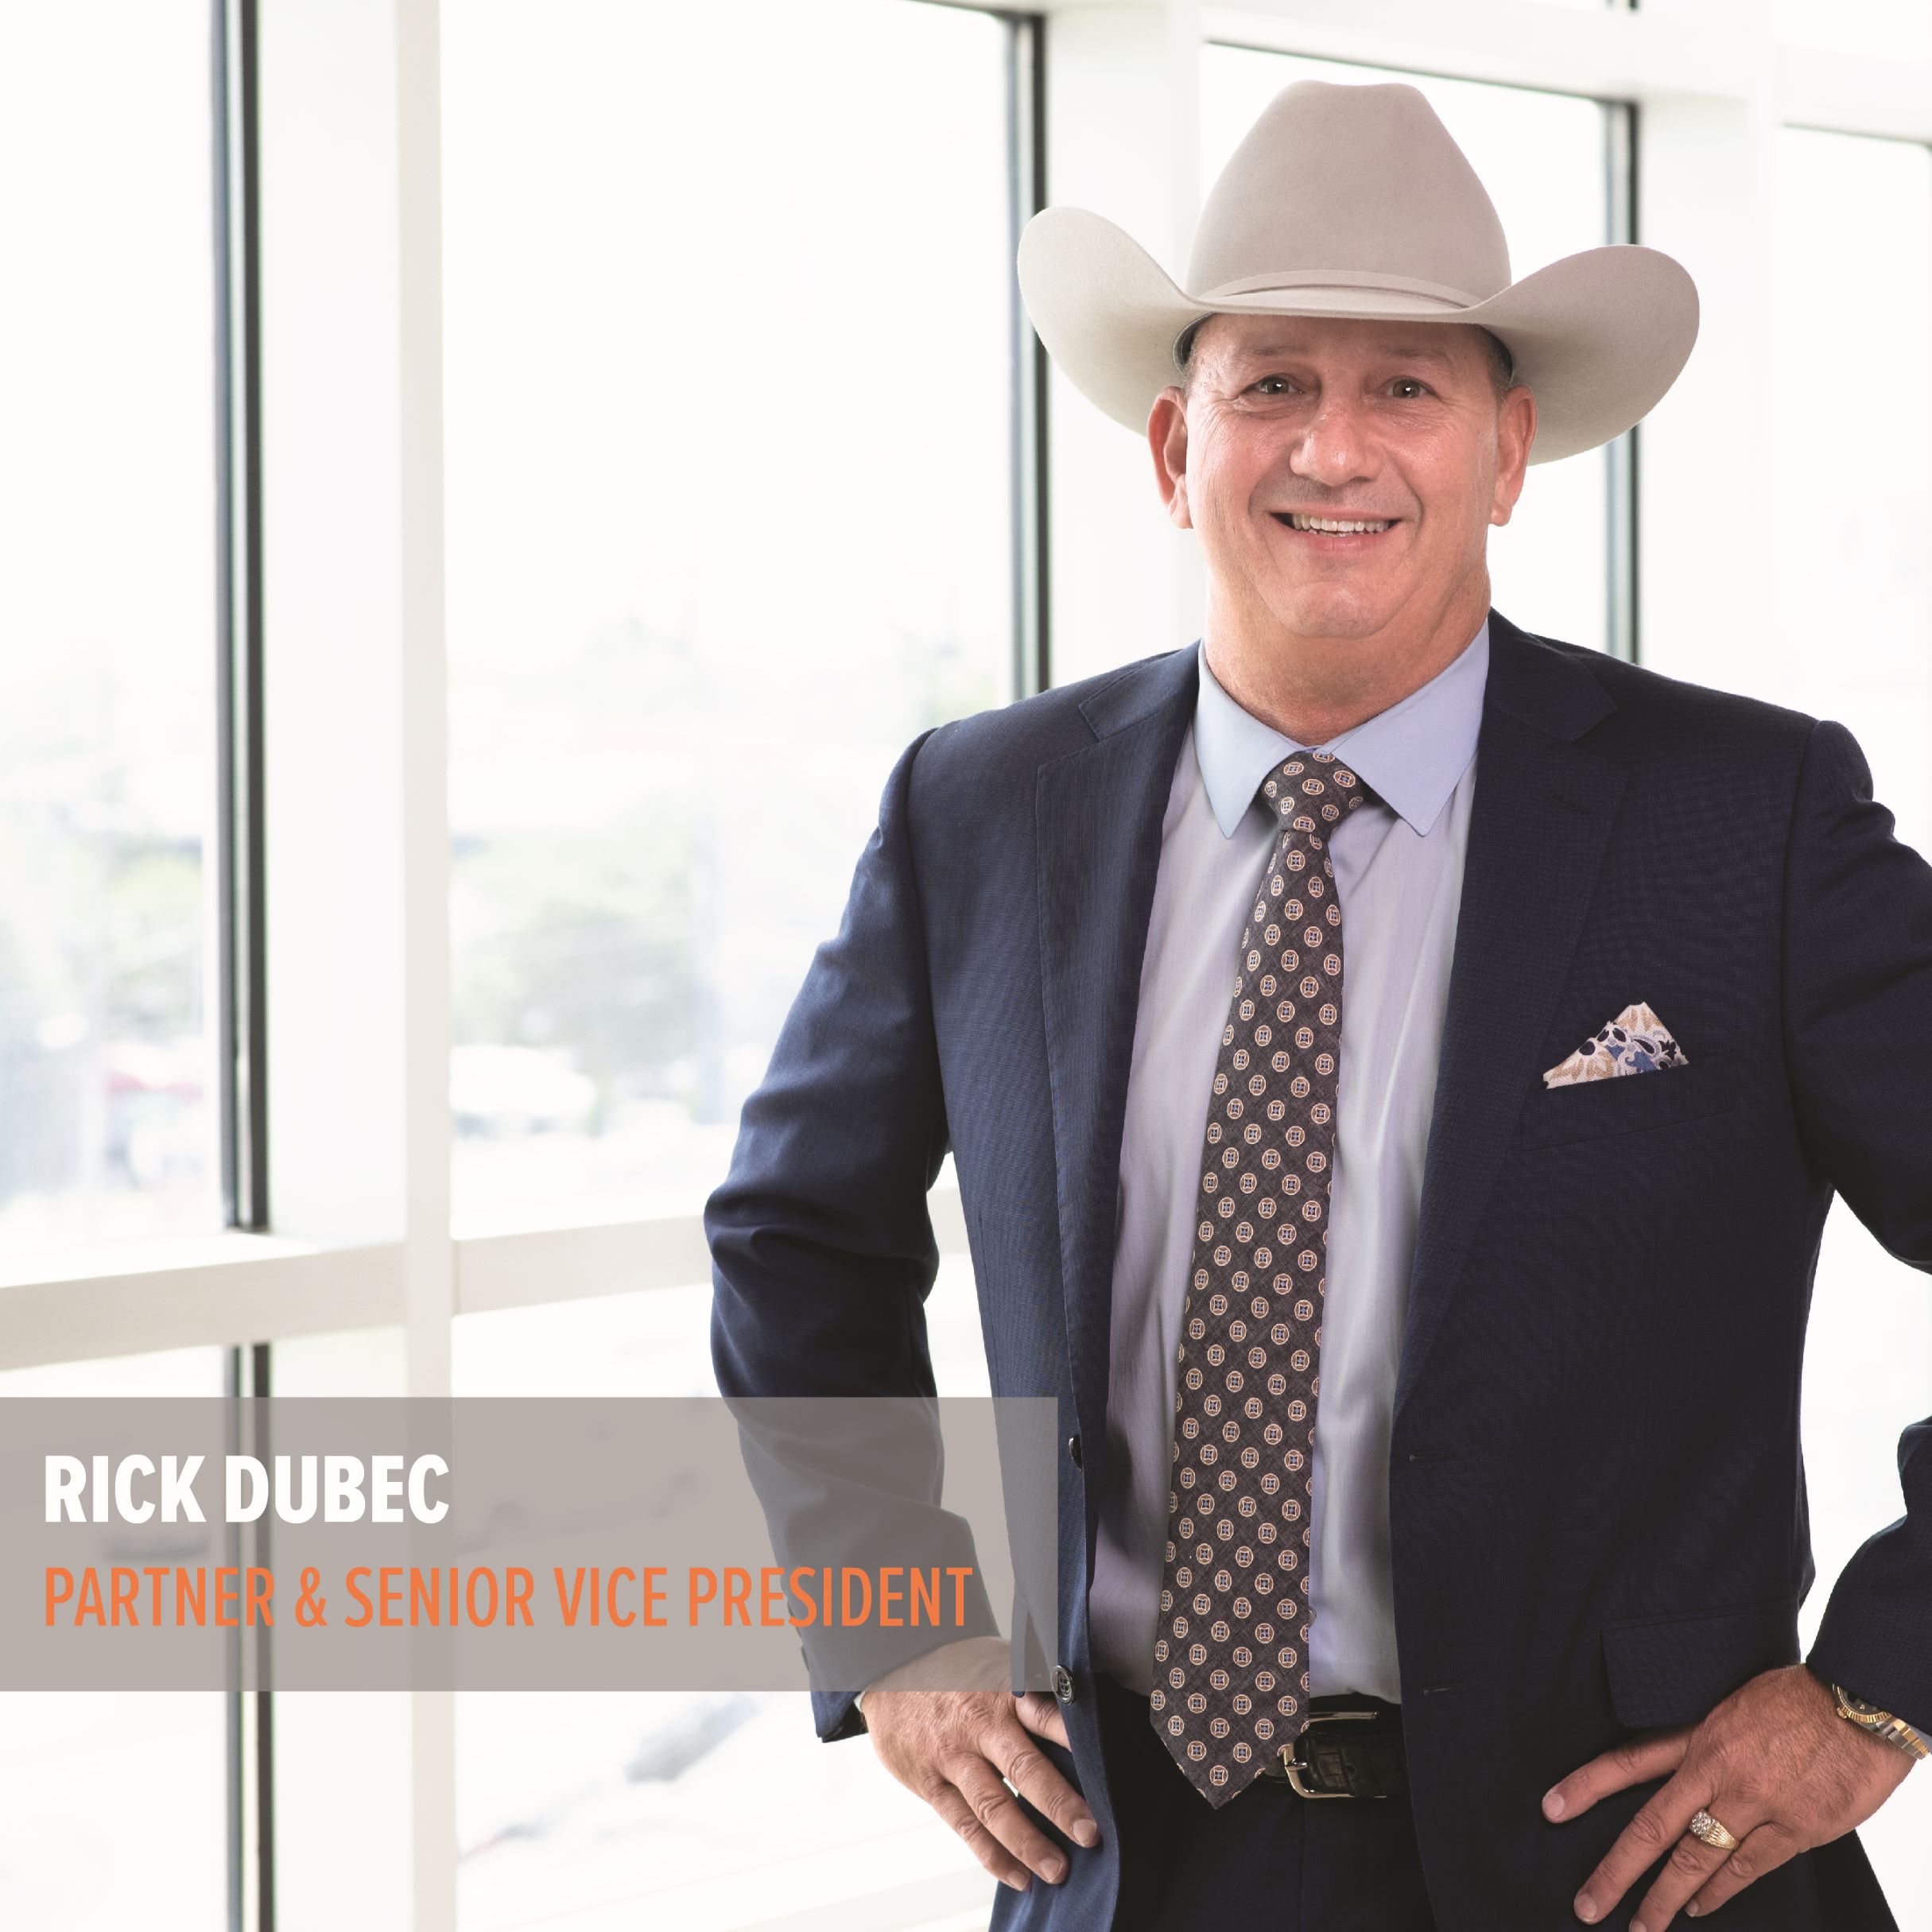 A man in a suit and cowboy hat with a name and title caption.